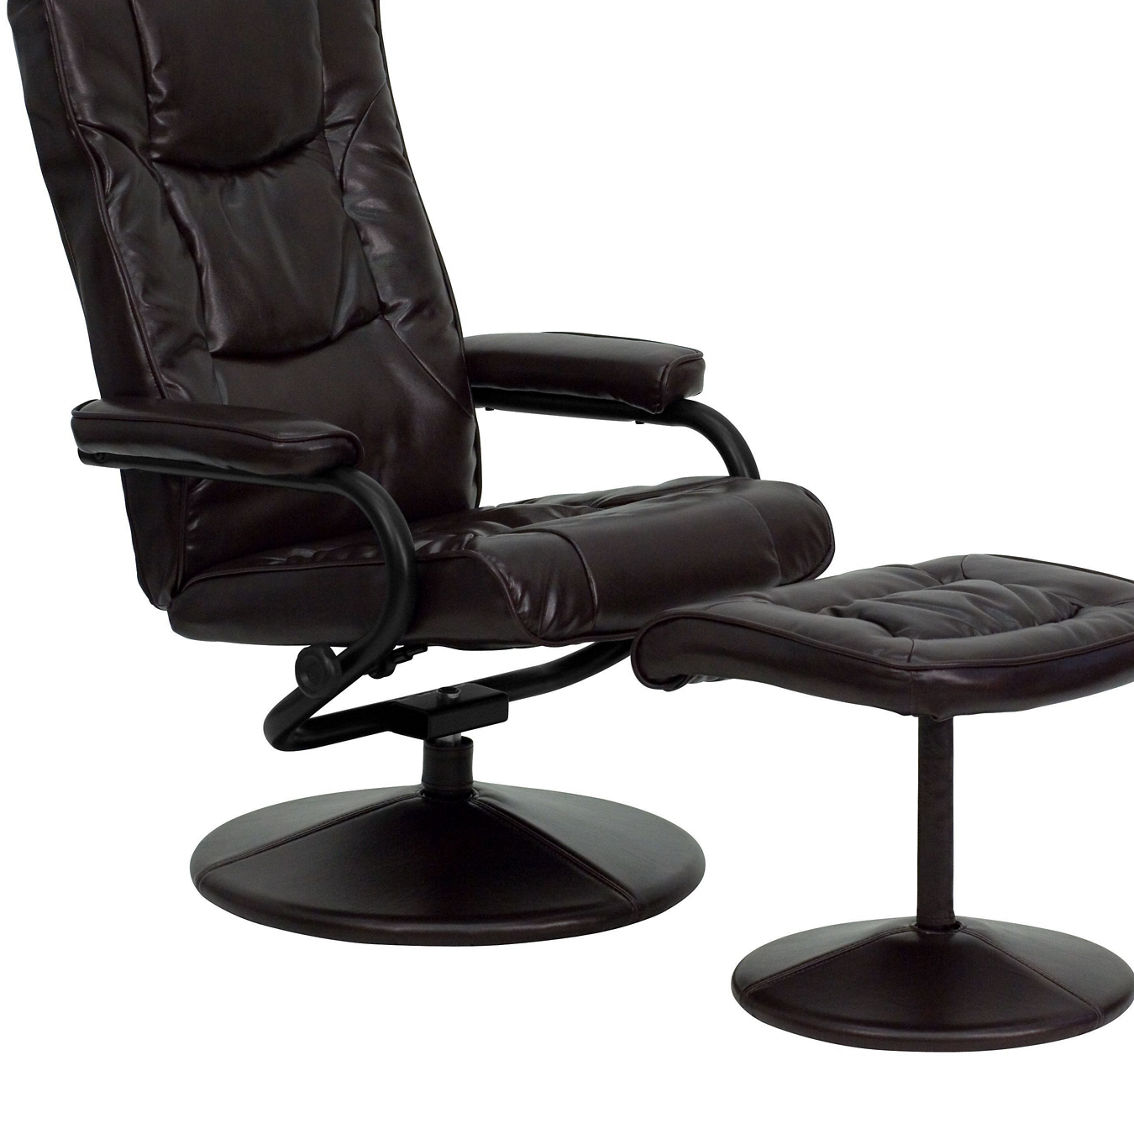 Flash Furniture LeatherSoft Recliner with Ottoman - Image 2 of 5